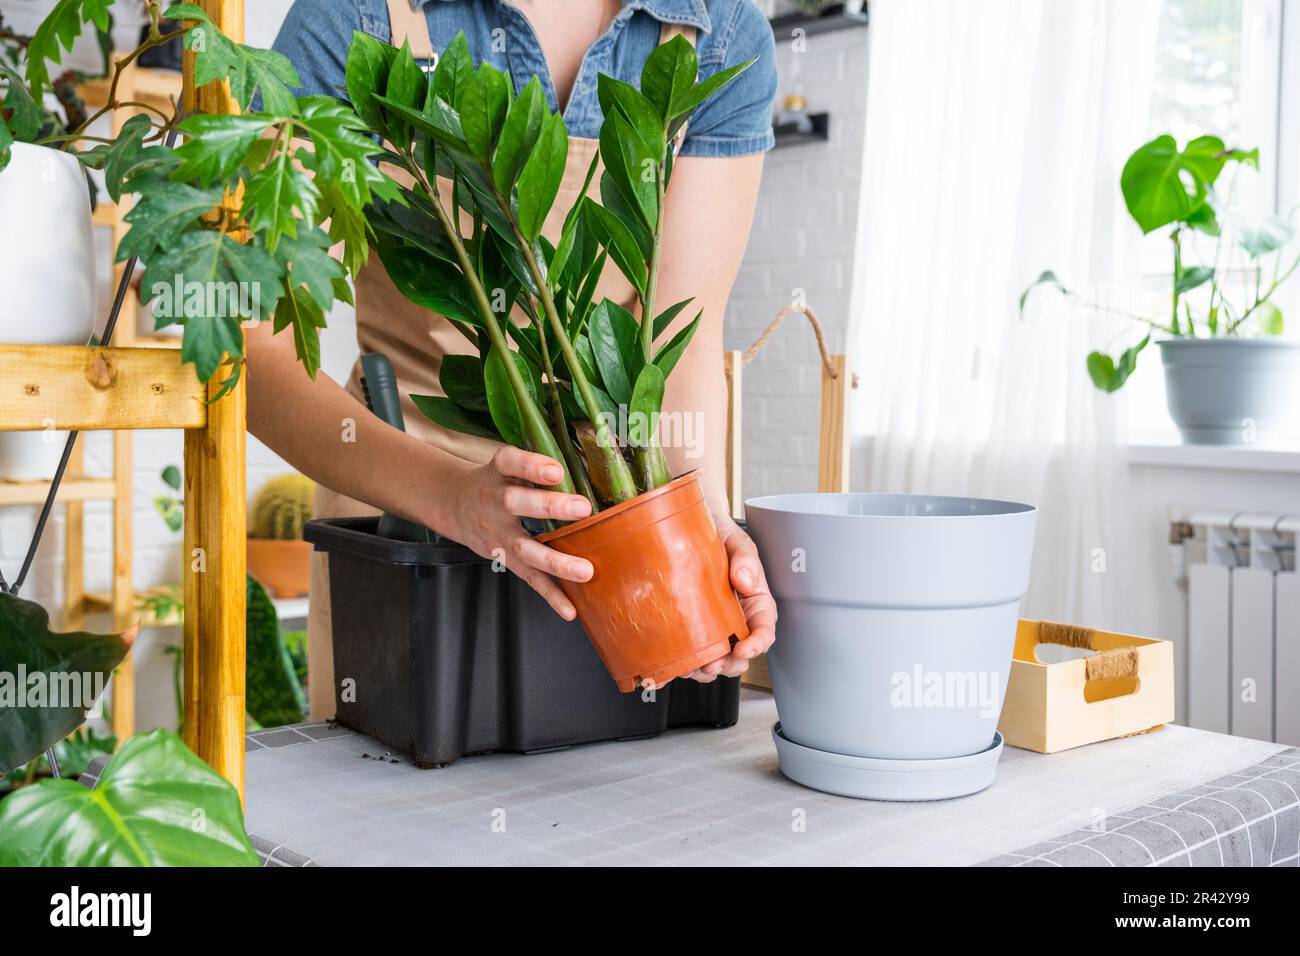 Repotting overgrown home plant succulent Zamioculcas  into new bigger pot. Caring for potted plant, hands of woman in apron, mock up Stock Photo